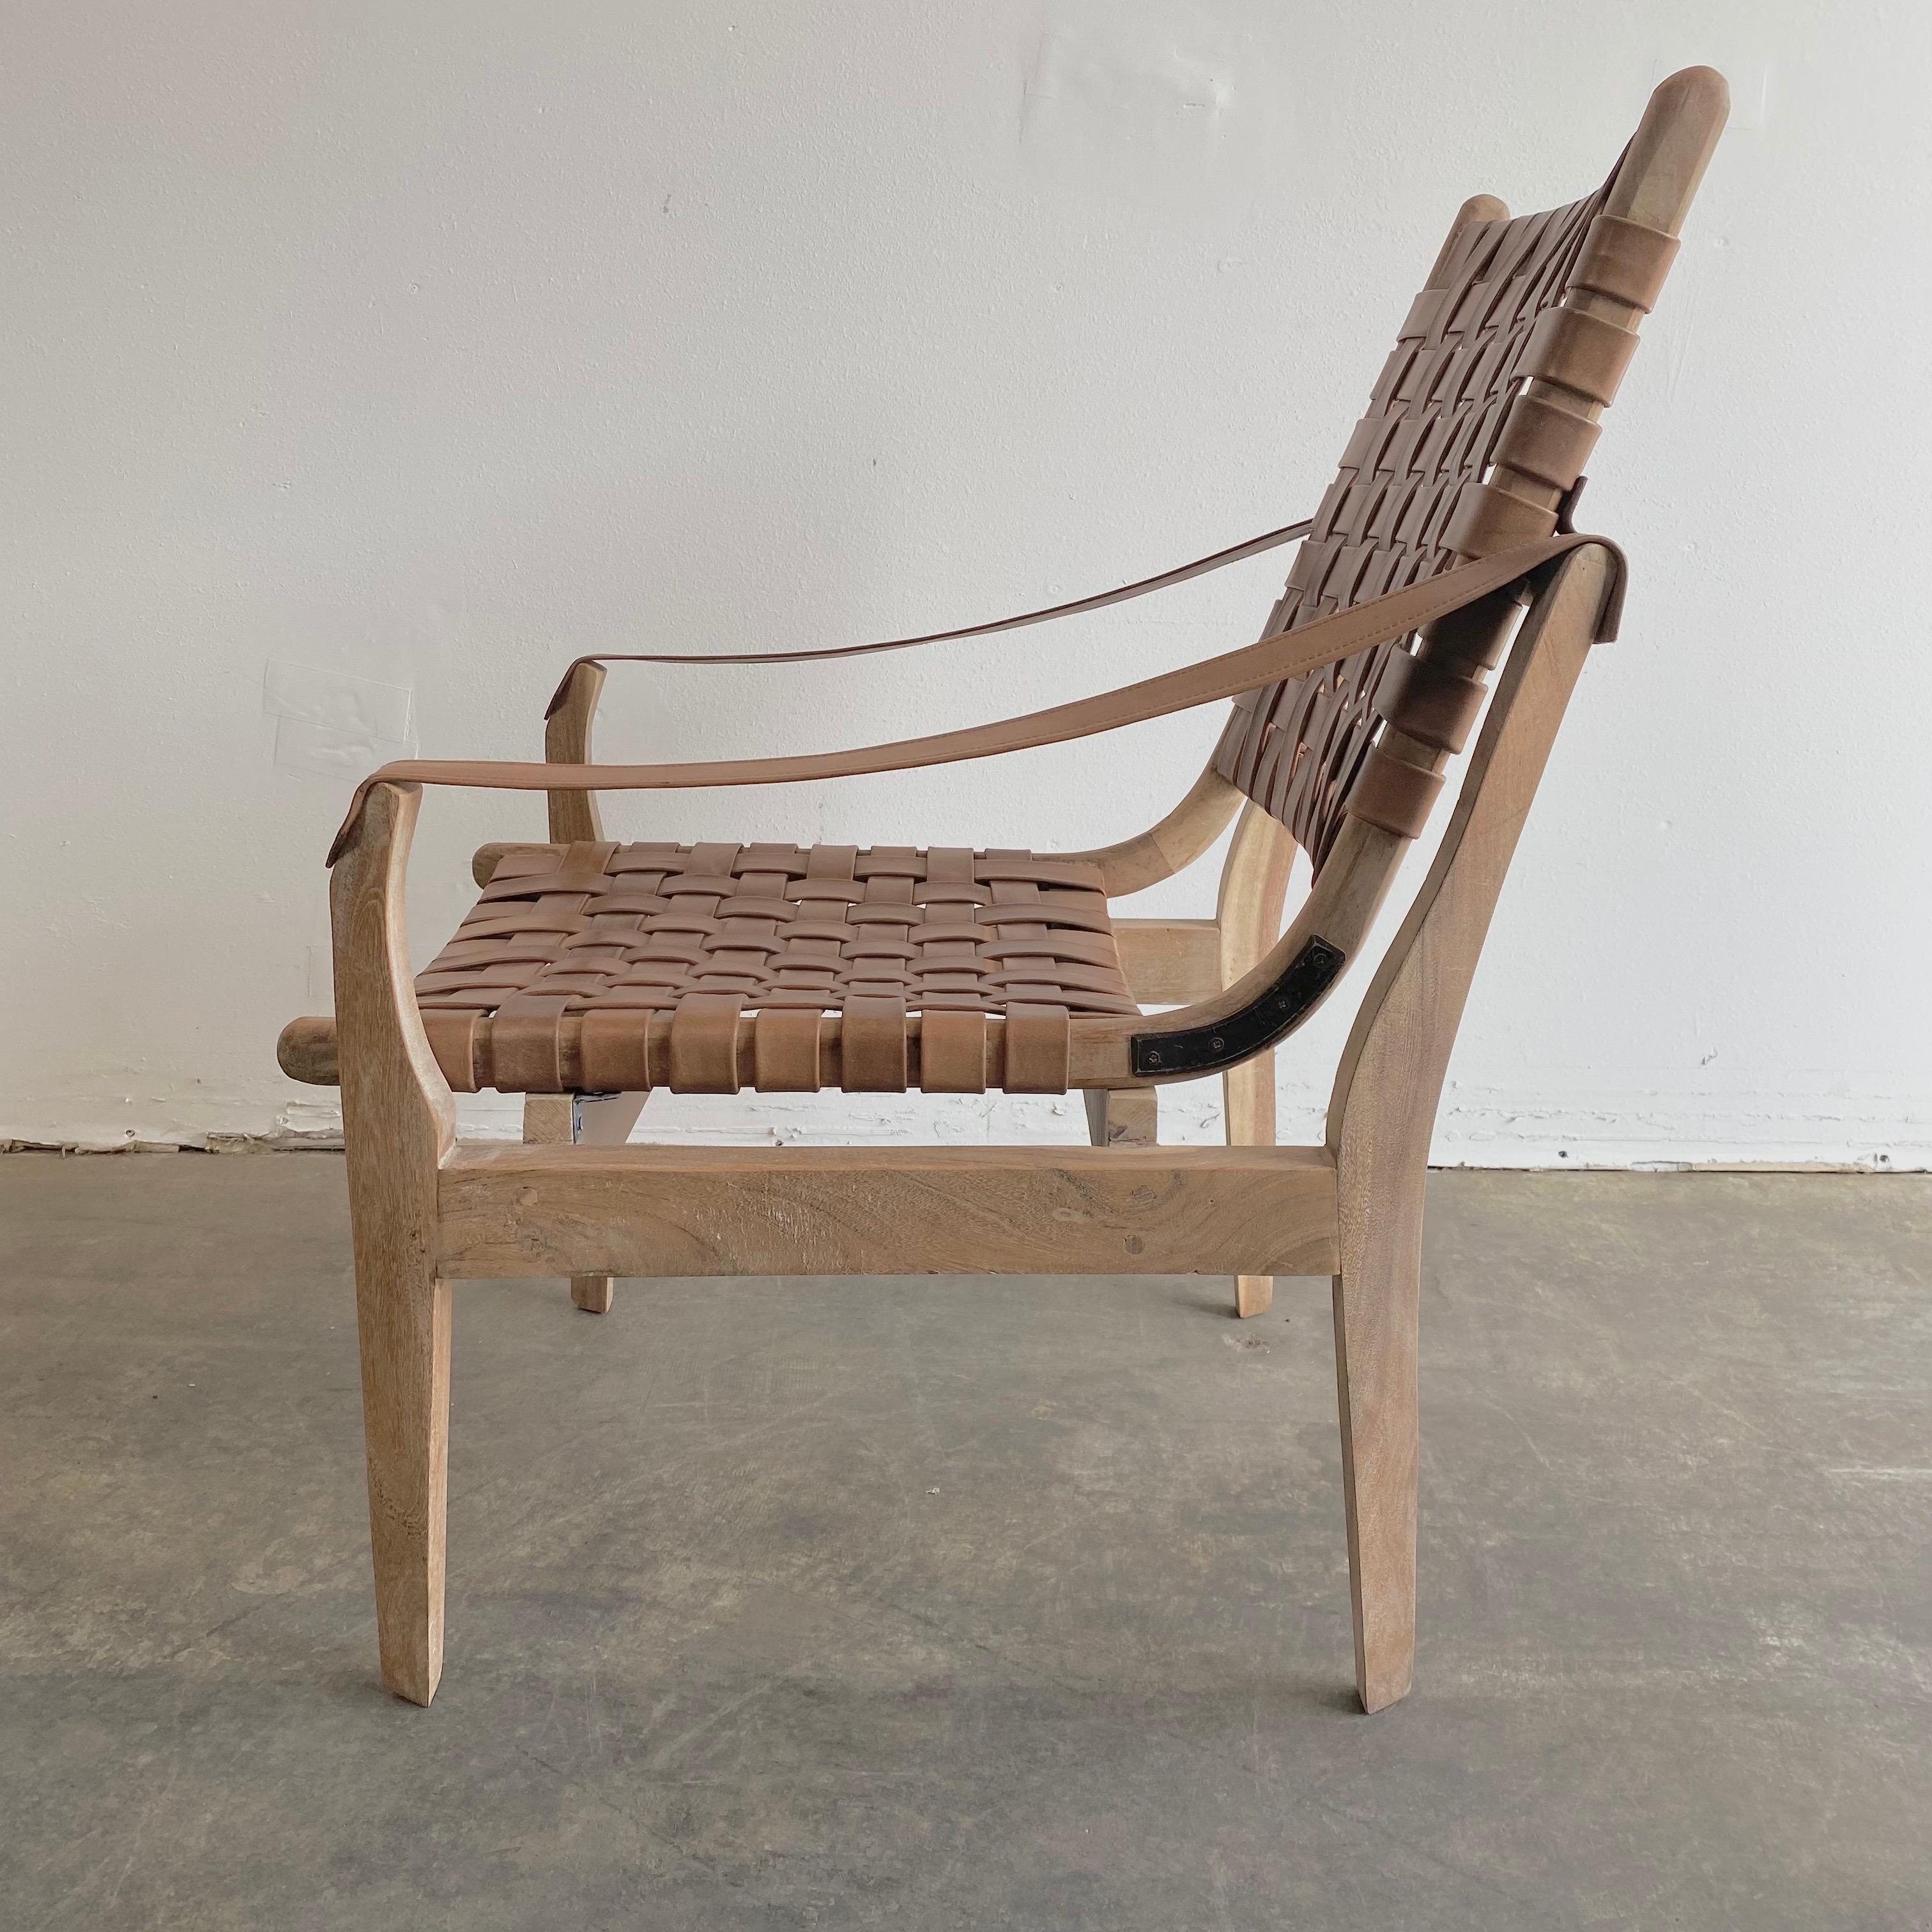 Modern Woven Leather Strap Teak Wood Chair In New Condition For Sale In Brea, CA